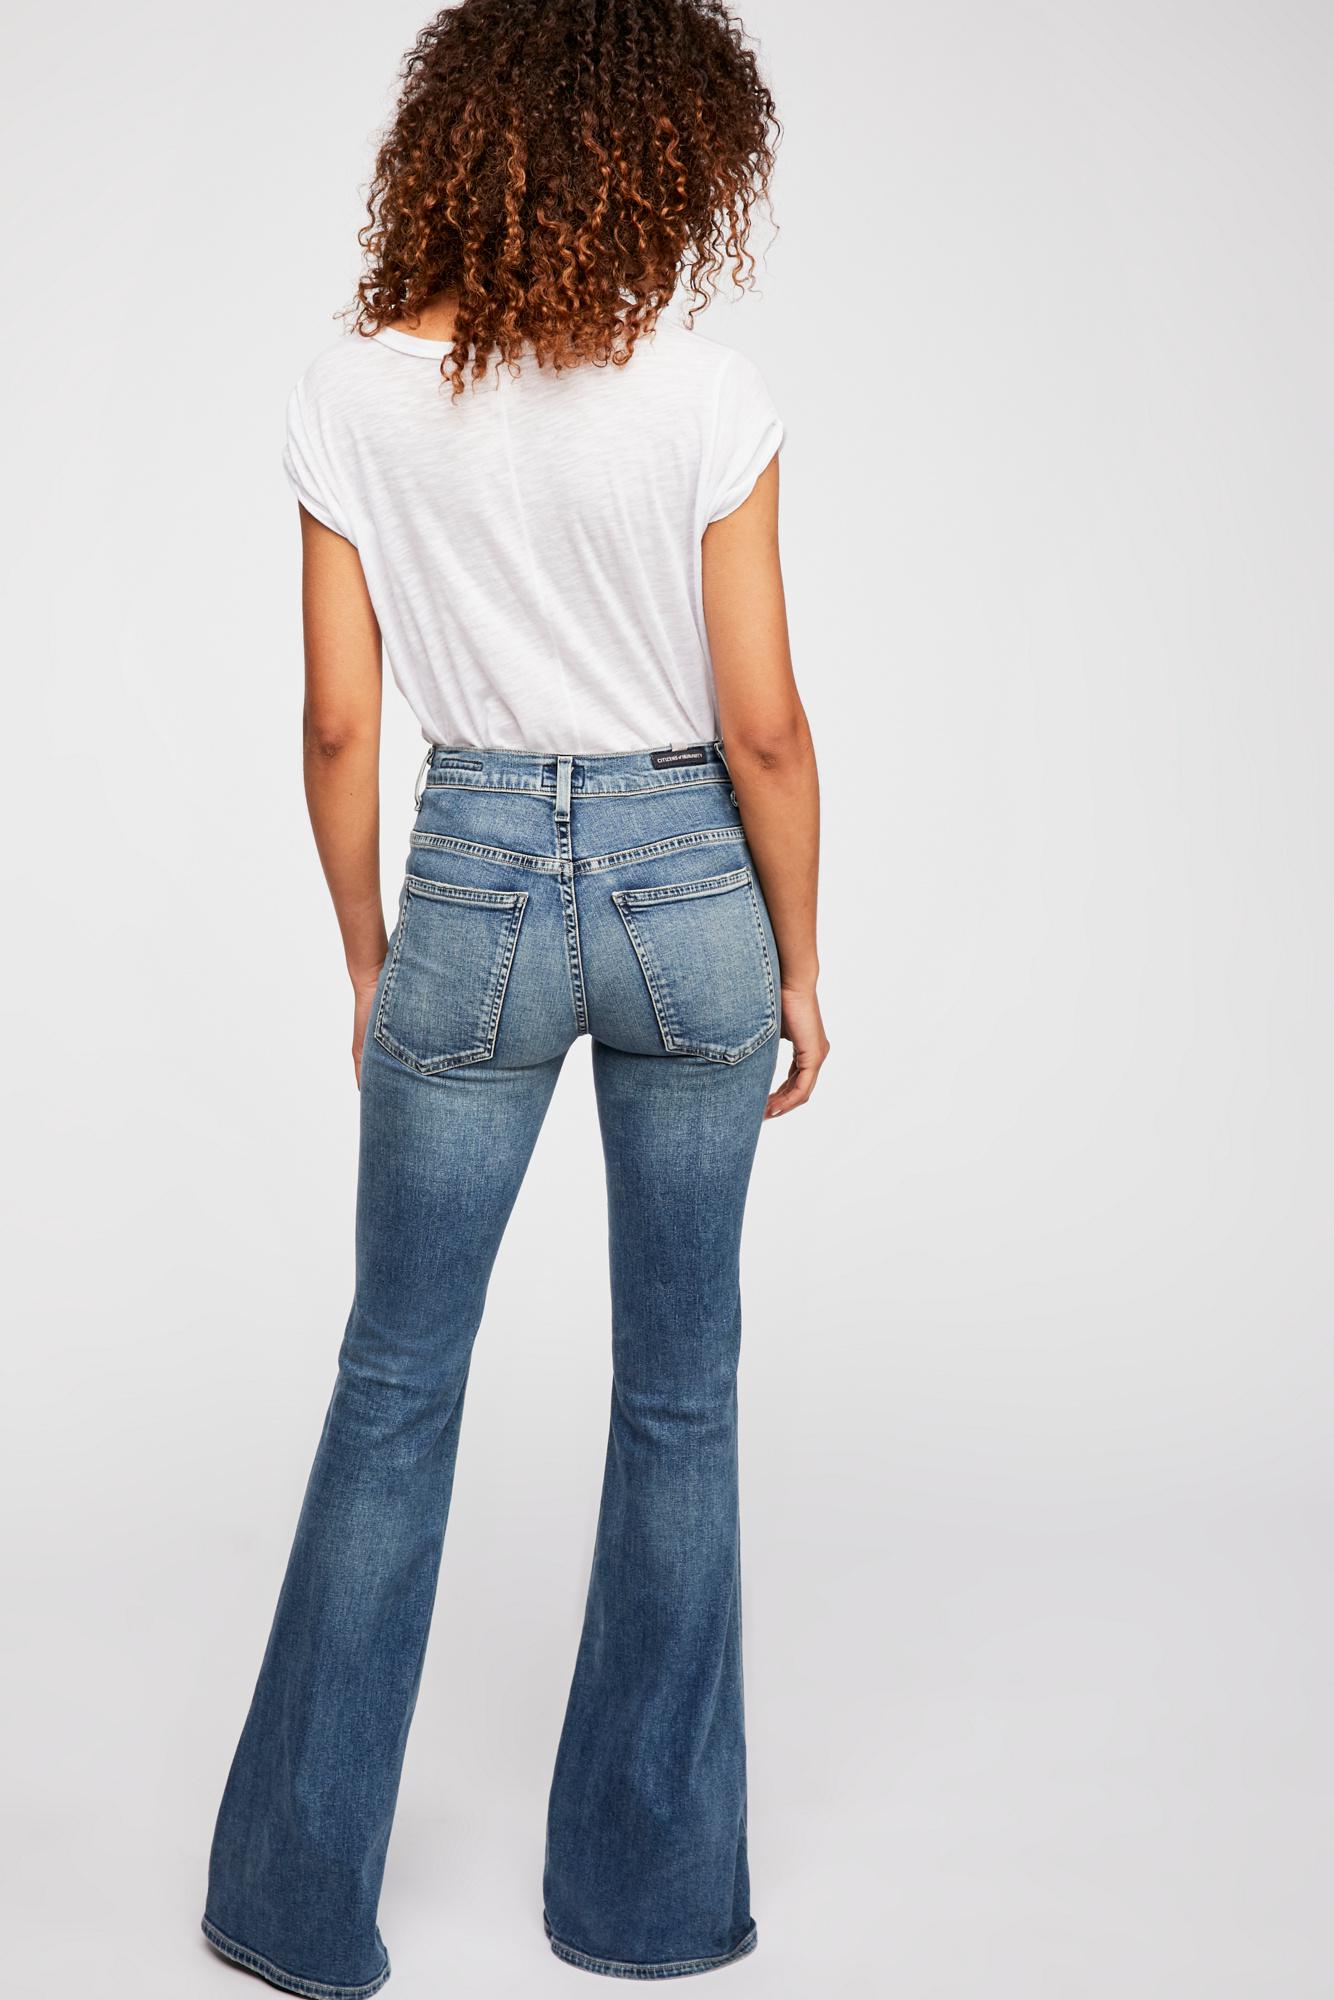 Free People Denim Citizens Of Humanity Chloe Flare Jeans in Blue - Lyst